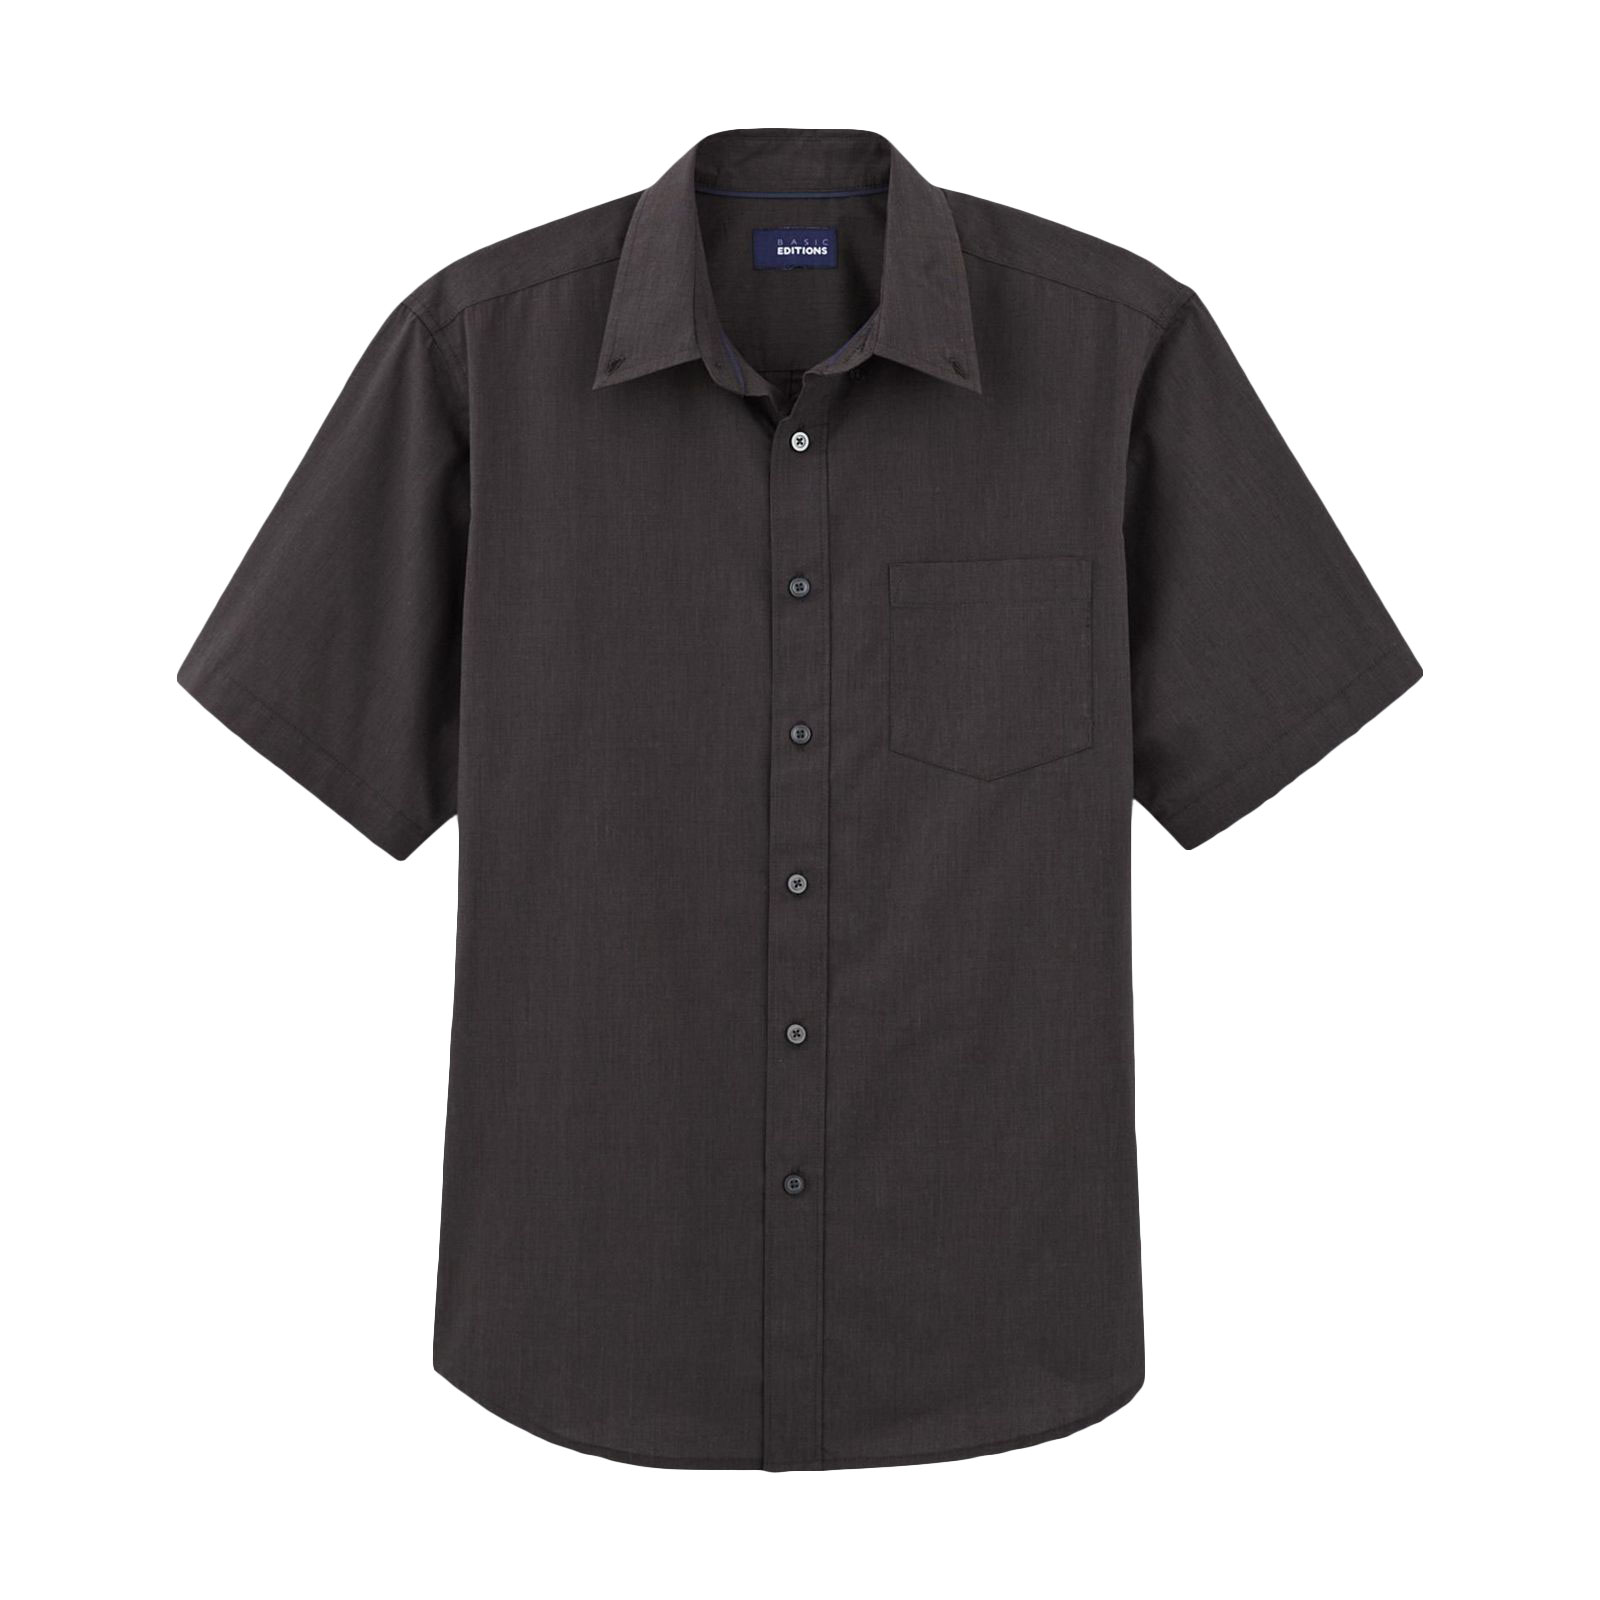 Basic Editions Men's Big & Tall Easy Care Woven Shirt